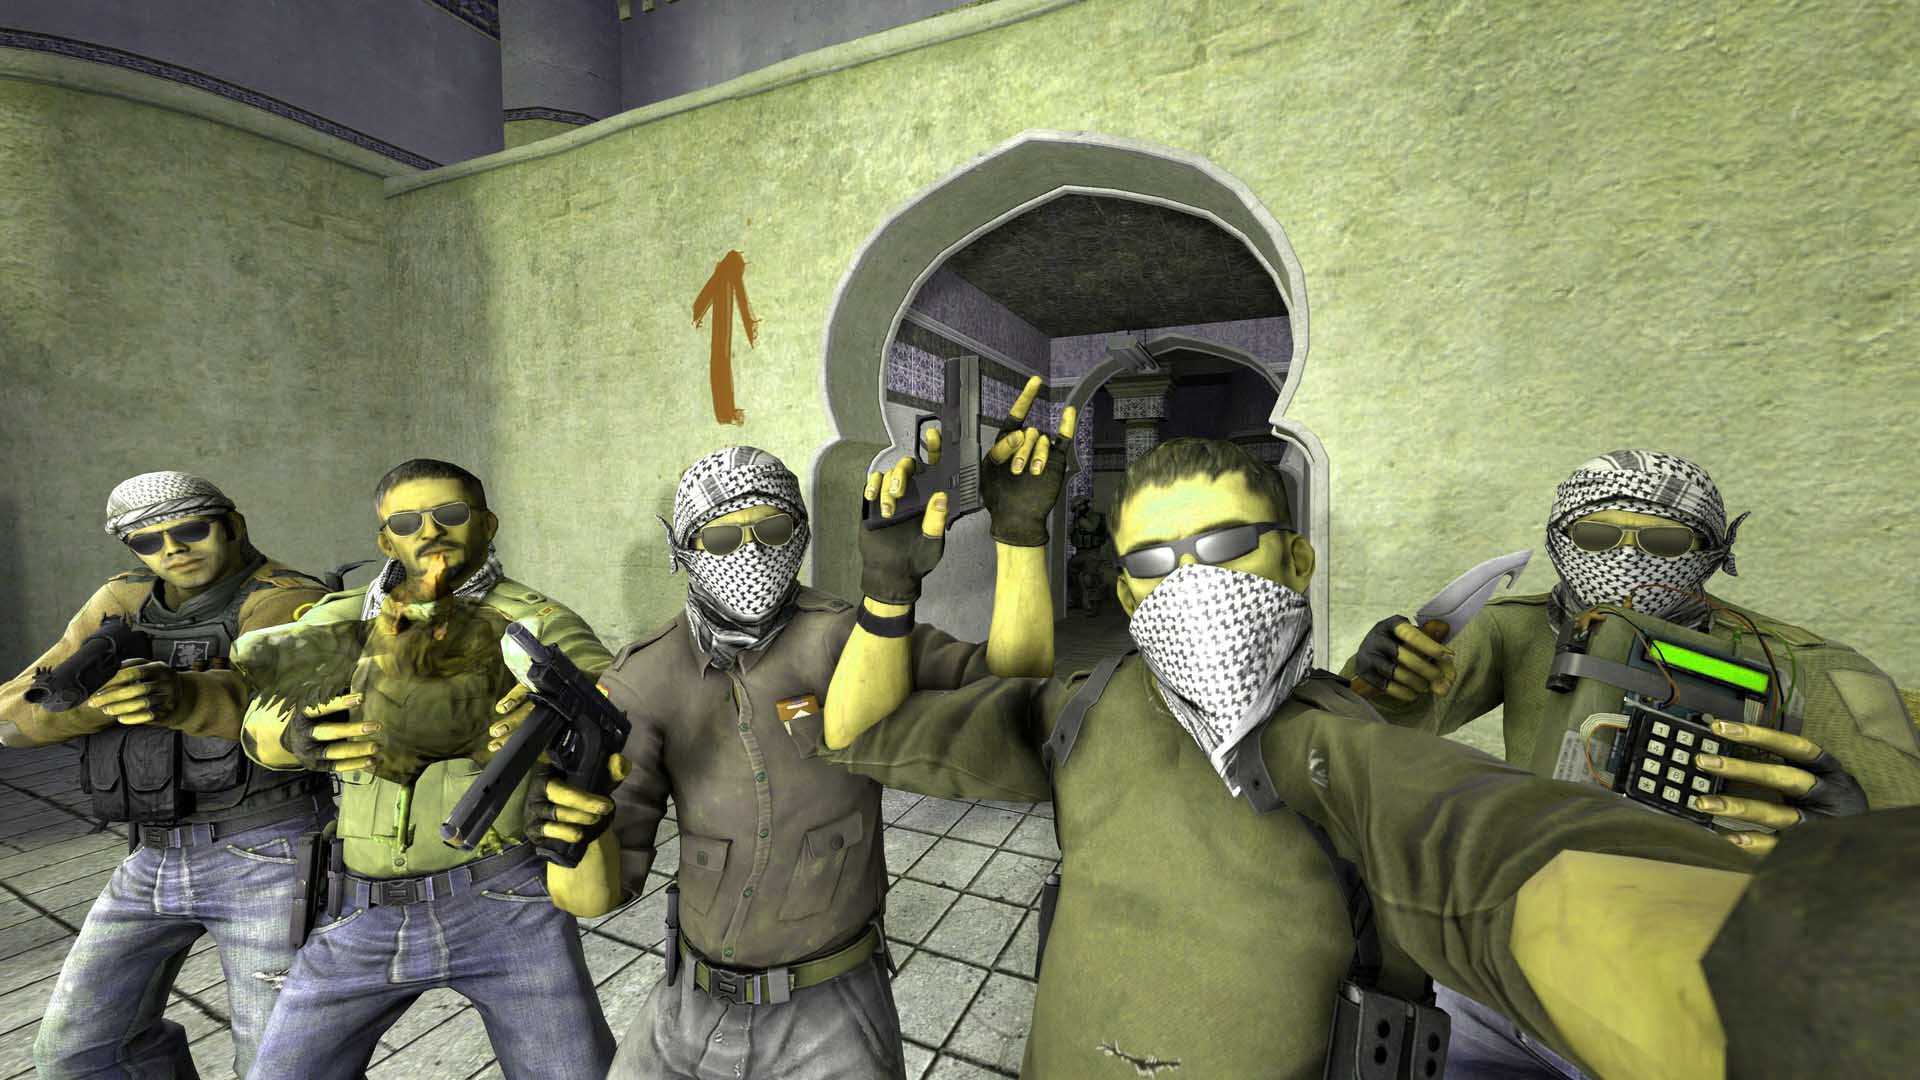 Free Download 10 Incredible Csgo Wallpapers That You Need To Download Now 10 Hub 19x1080 For Your Desktop Mobile Tablet Explore 44 Cs Go Terrorist Wallpaper Cs Go Terrorist